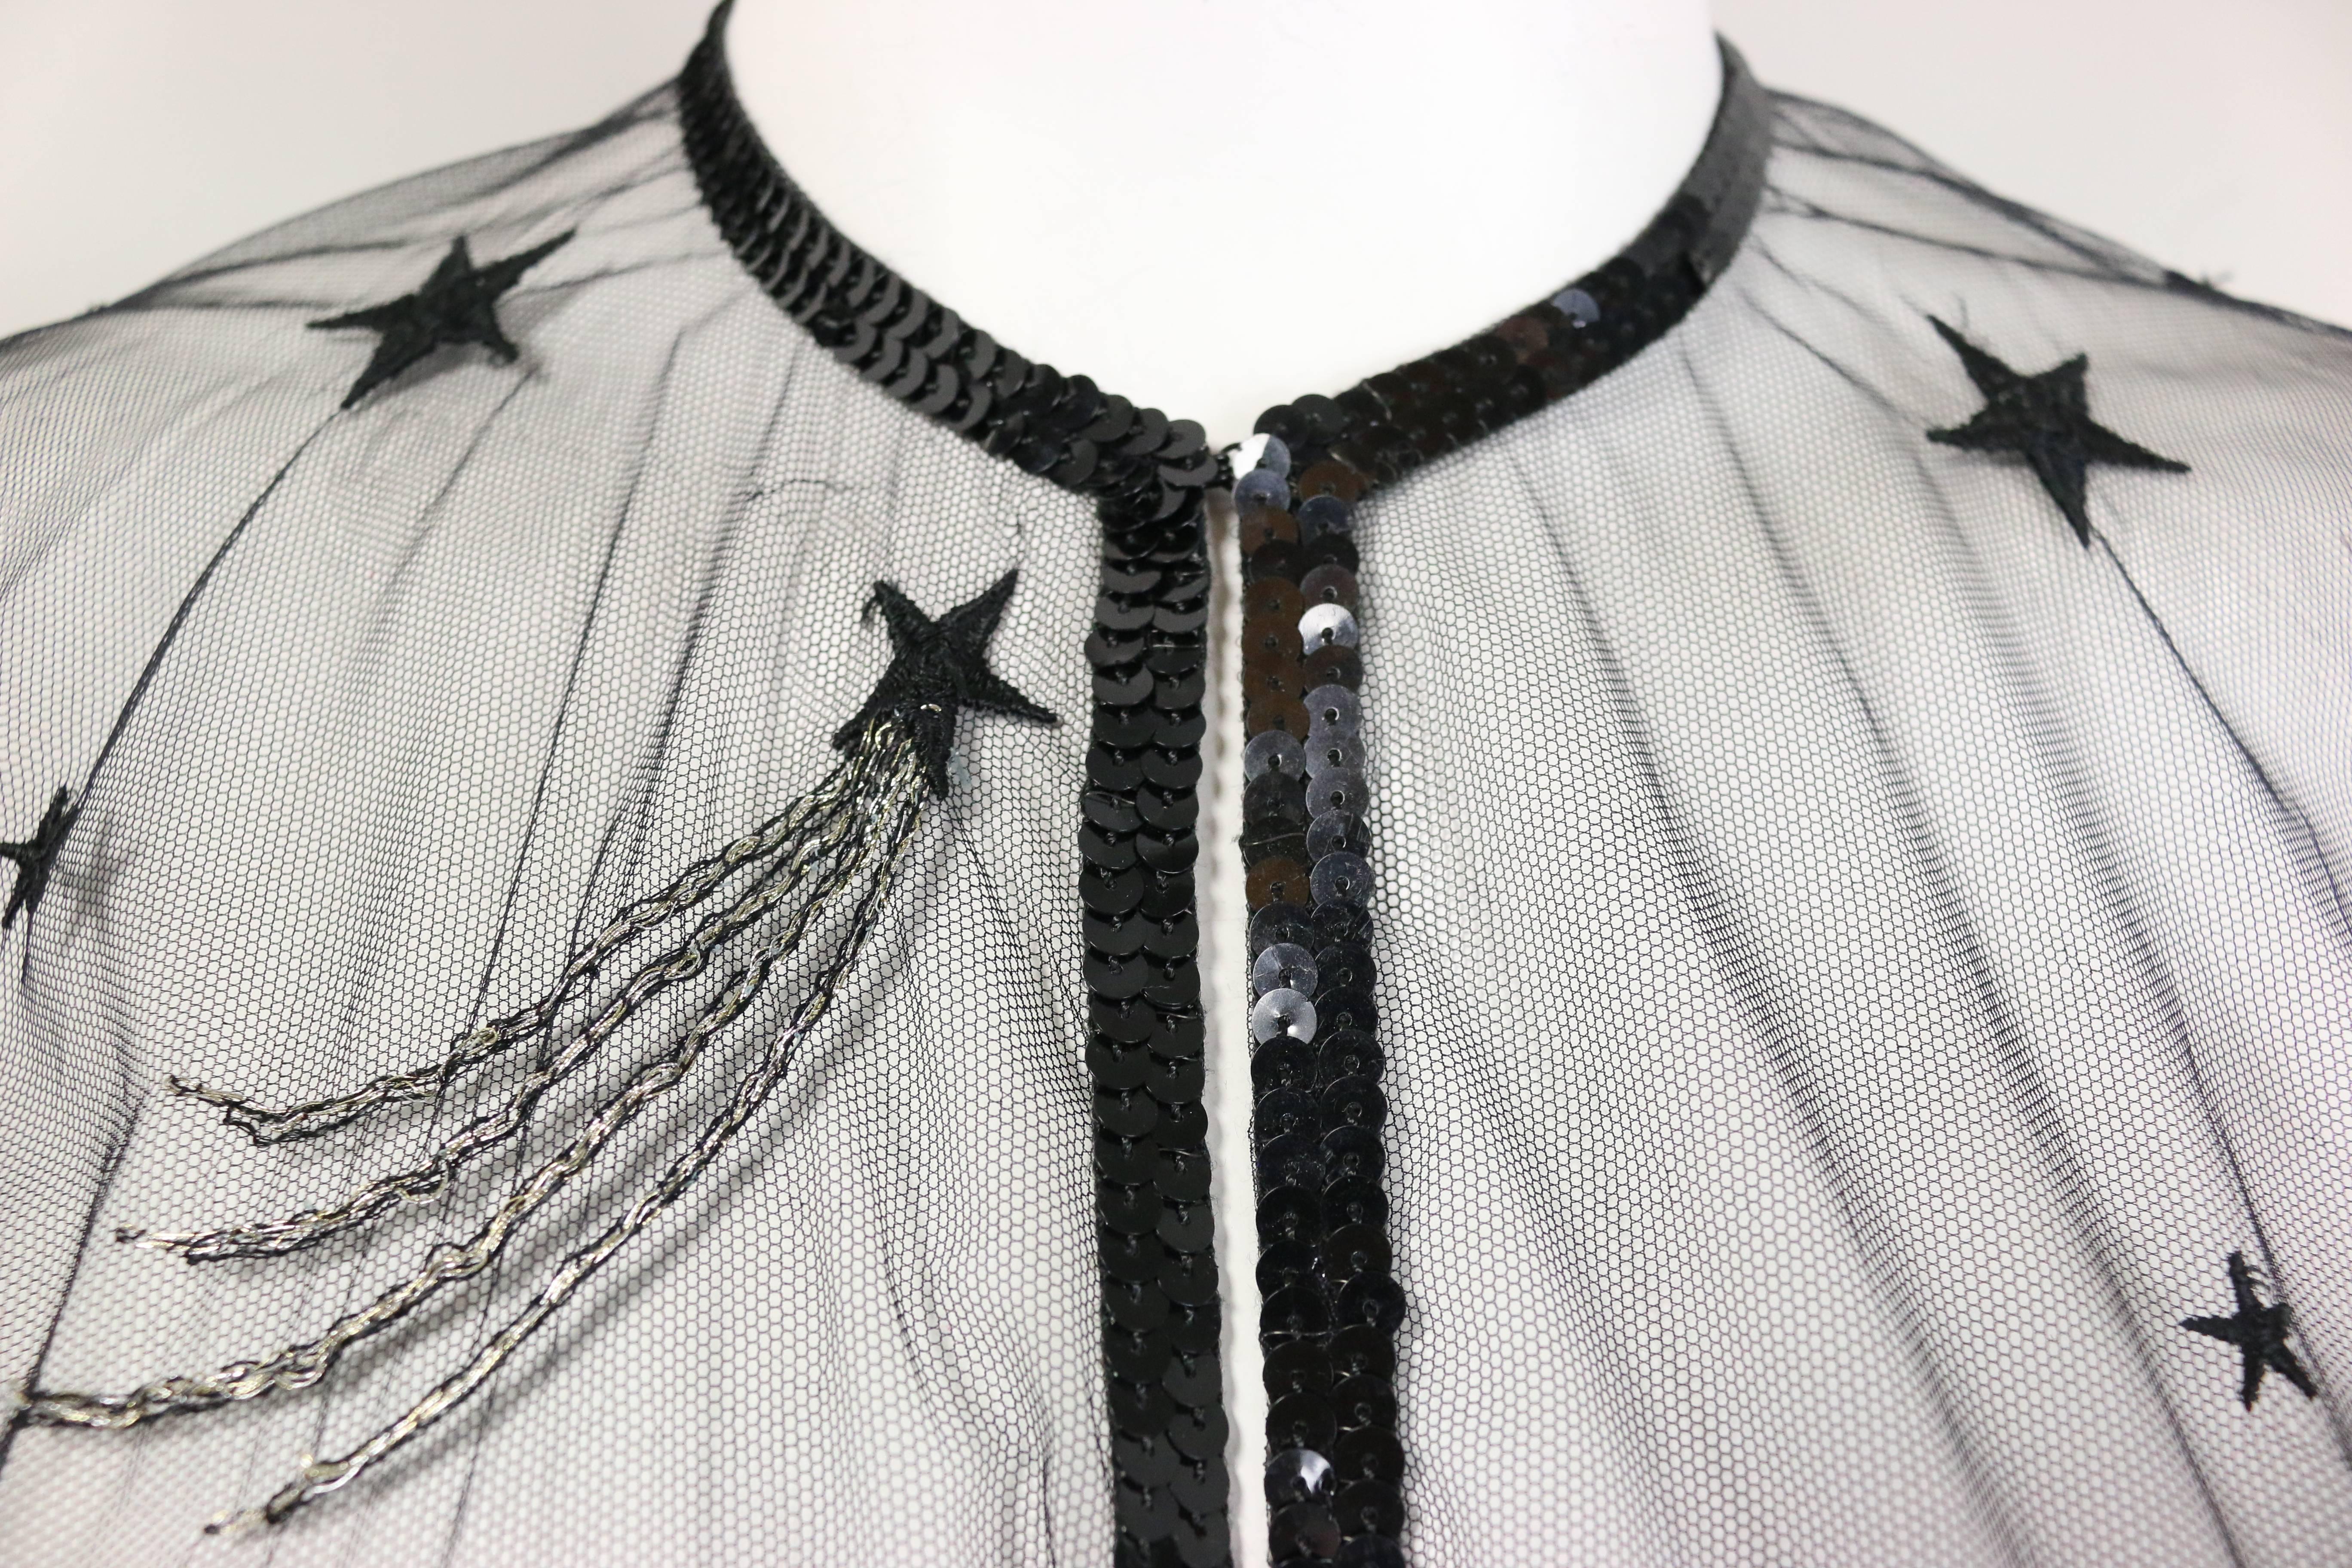 - Vintage Chanel embroidered see through evening dress gown from the late 80s collection. Featuring black sequins piping trims, a black embroidered star with silver linings, and a hook closure. A very classic and one of the early years of Karl